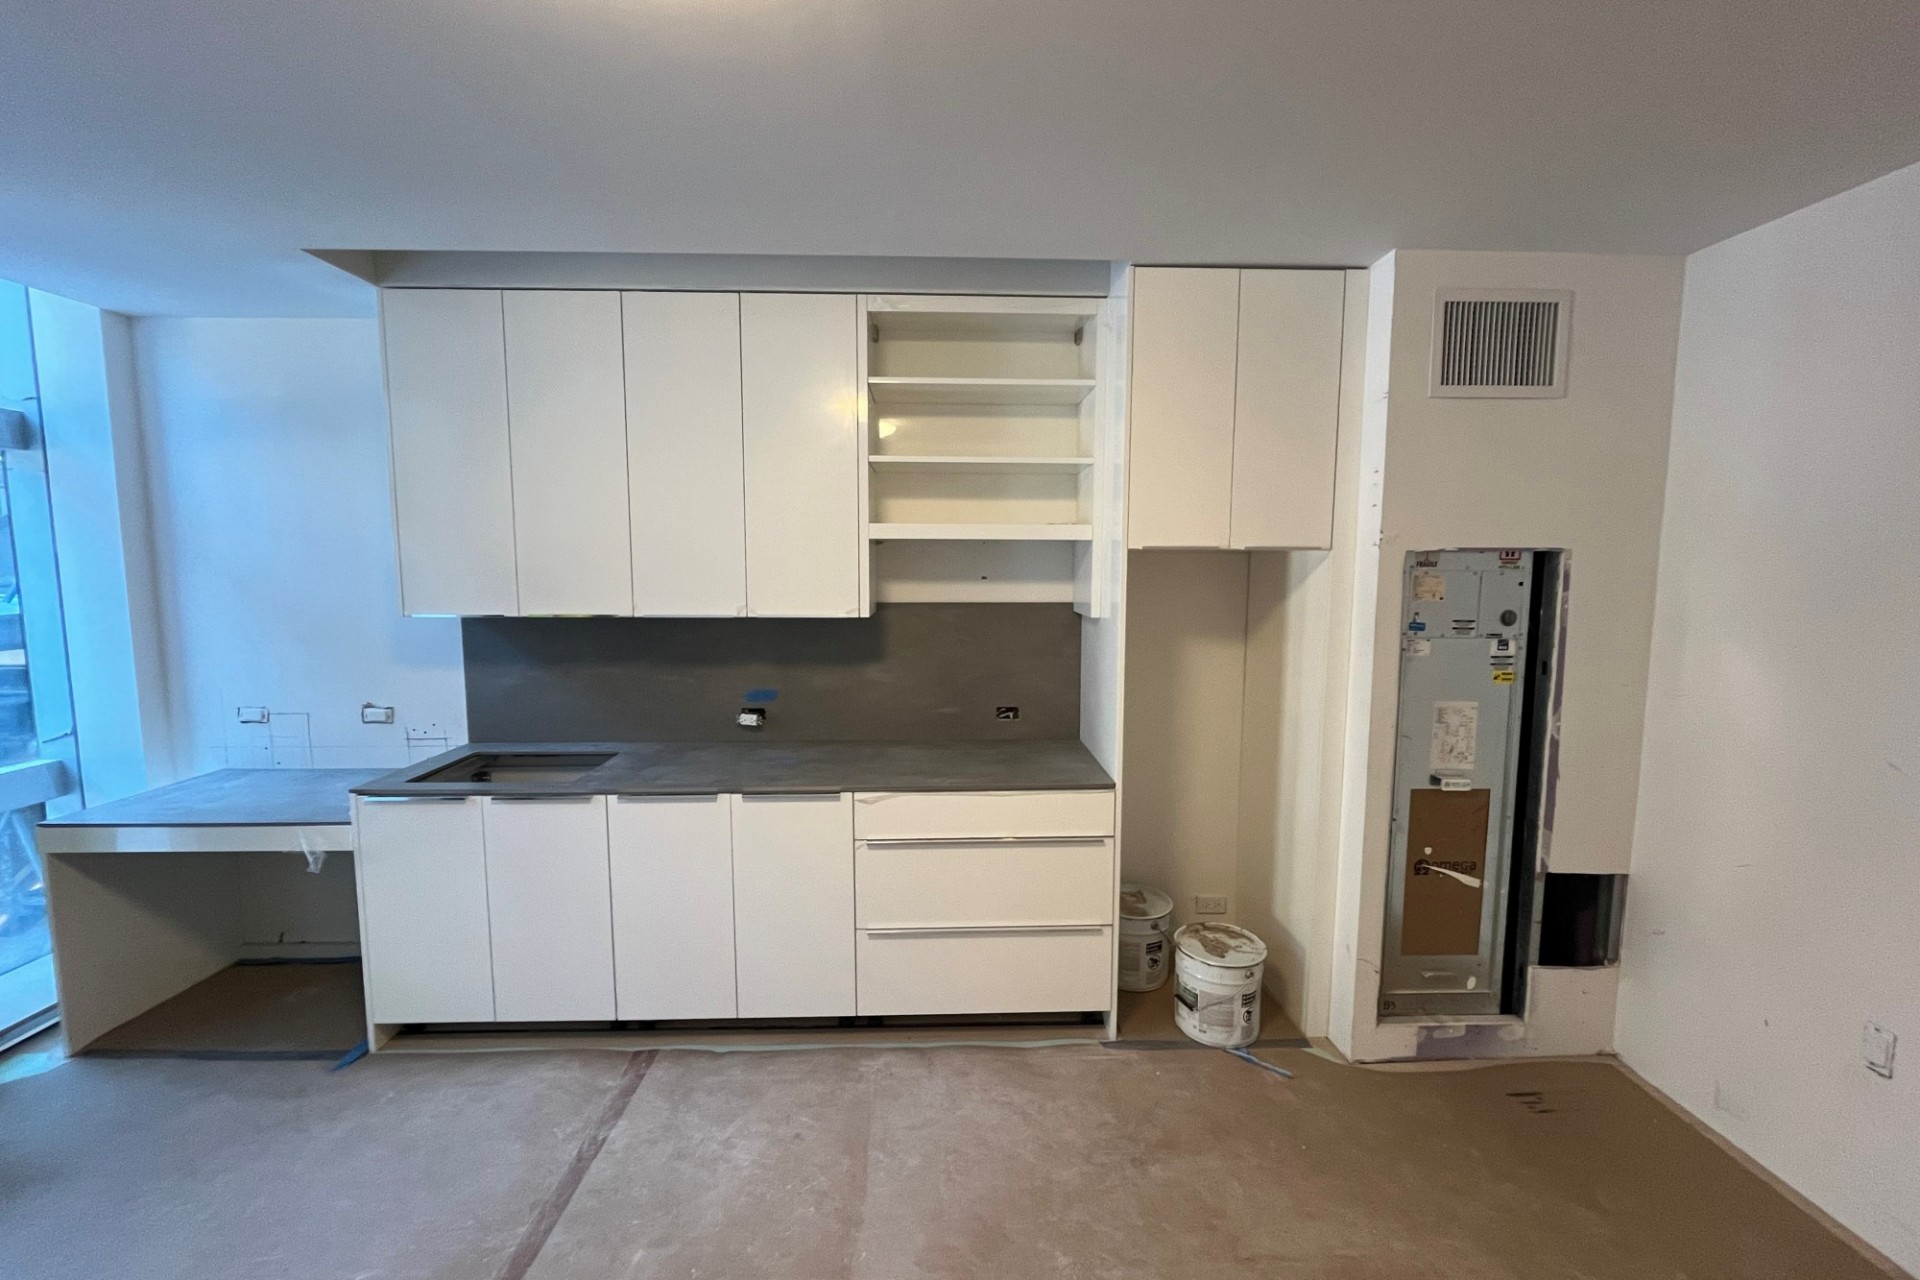 A completed kitchen inside an apartment unit in 600 W. 125th Street that has white finishes.